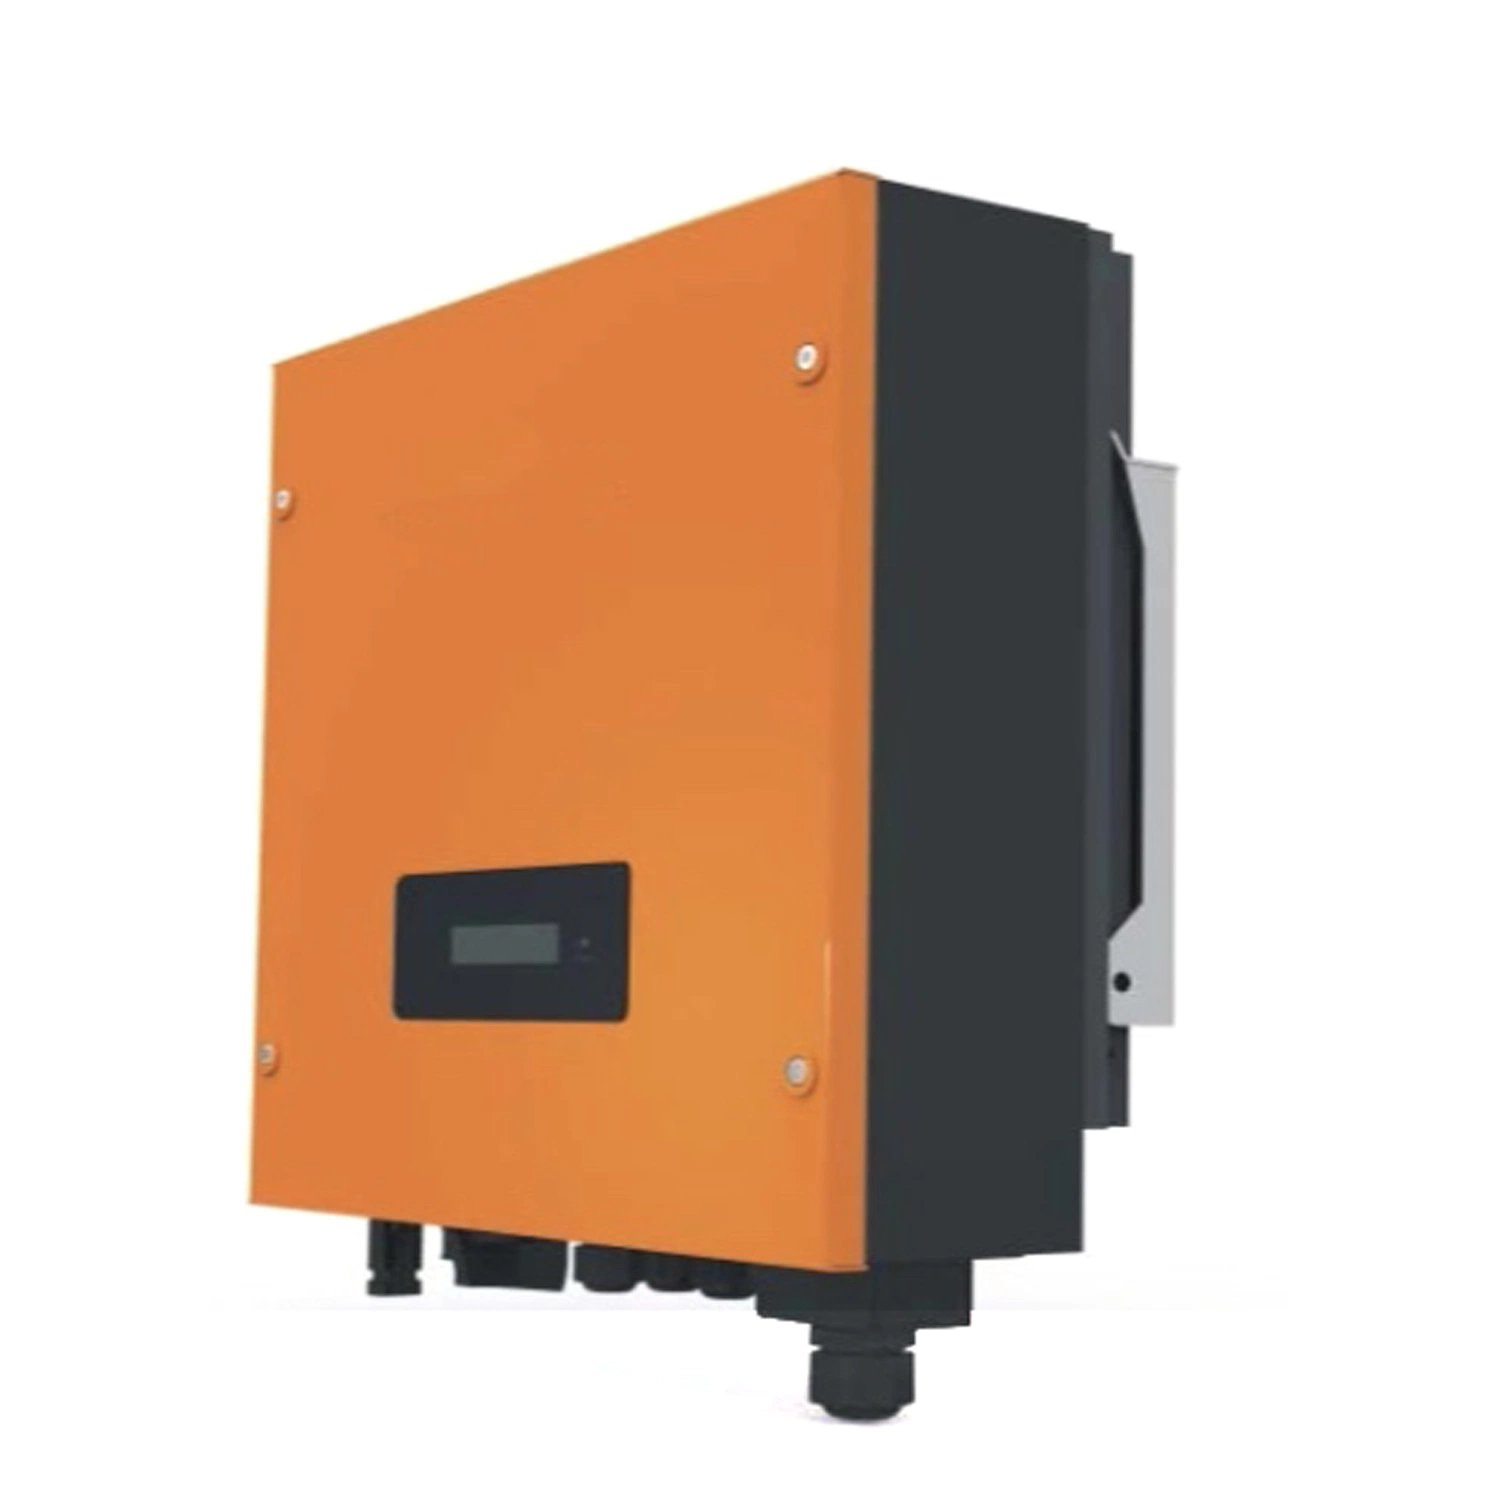 Factory Price 500W 5kVA off Grid Hybrid Solar Power System Inverter with Built in MPPT Controller